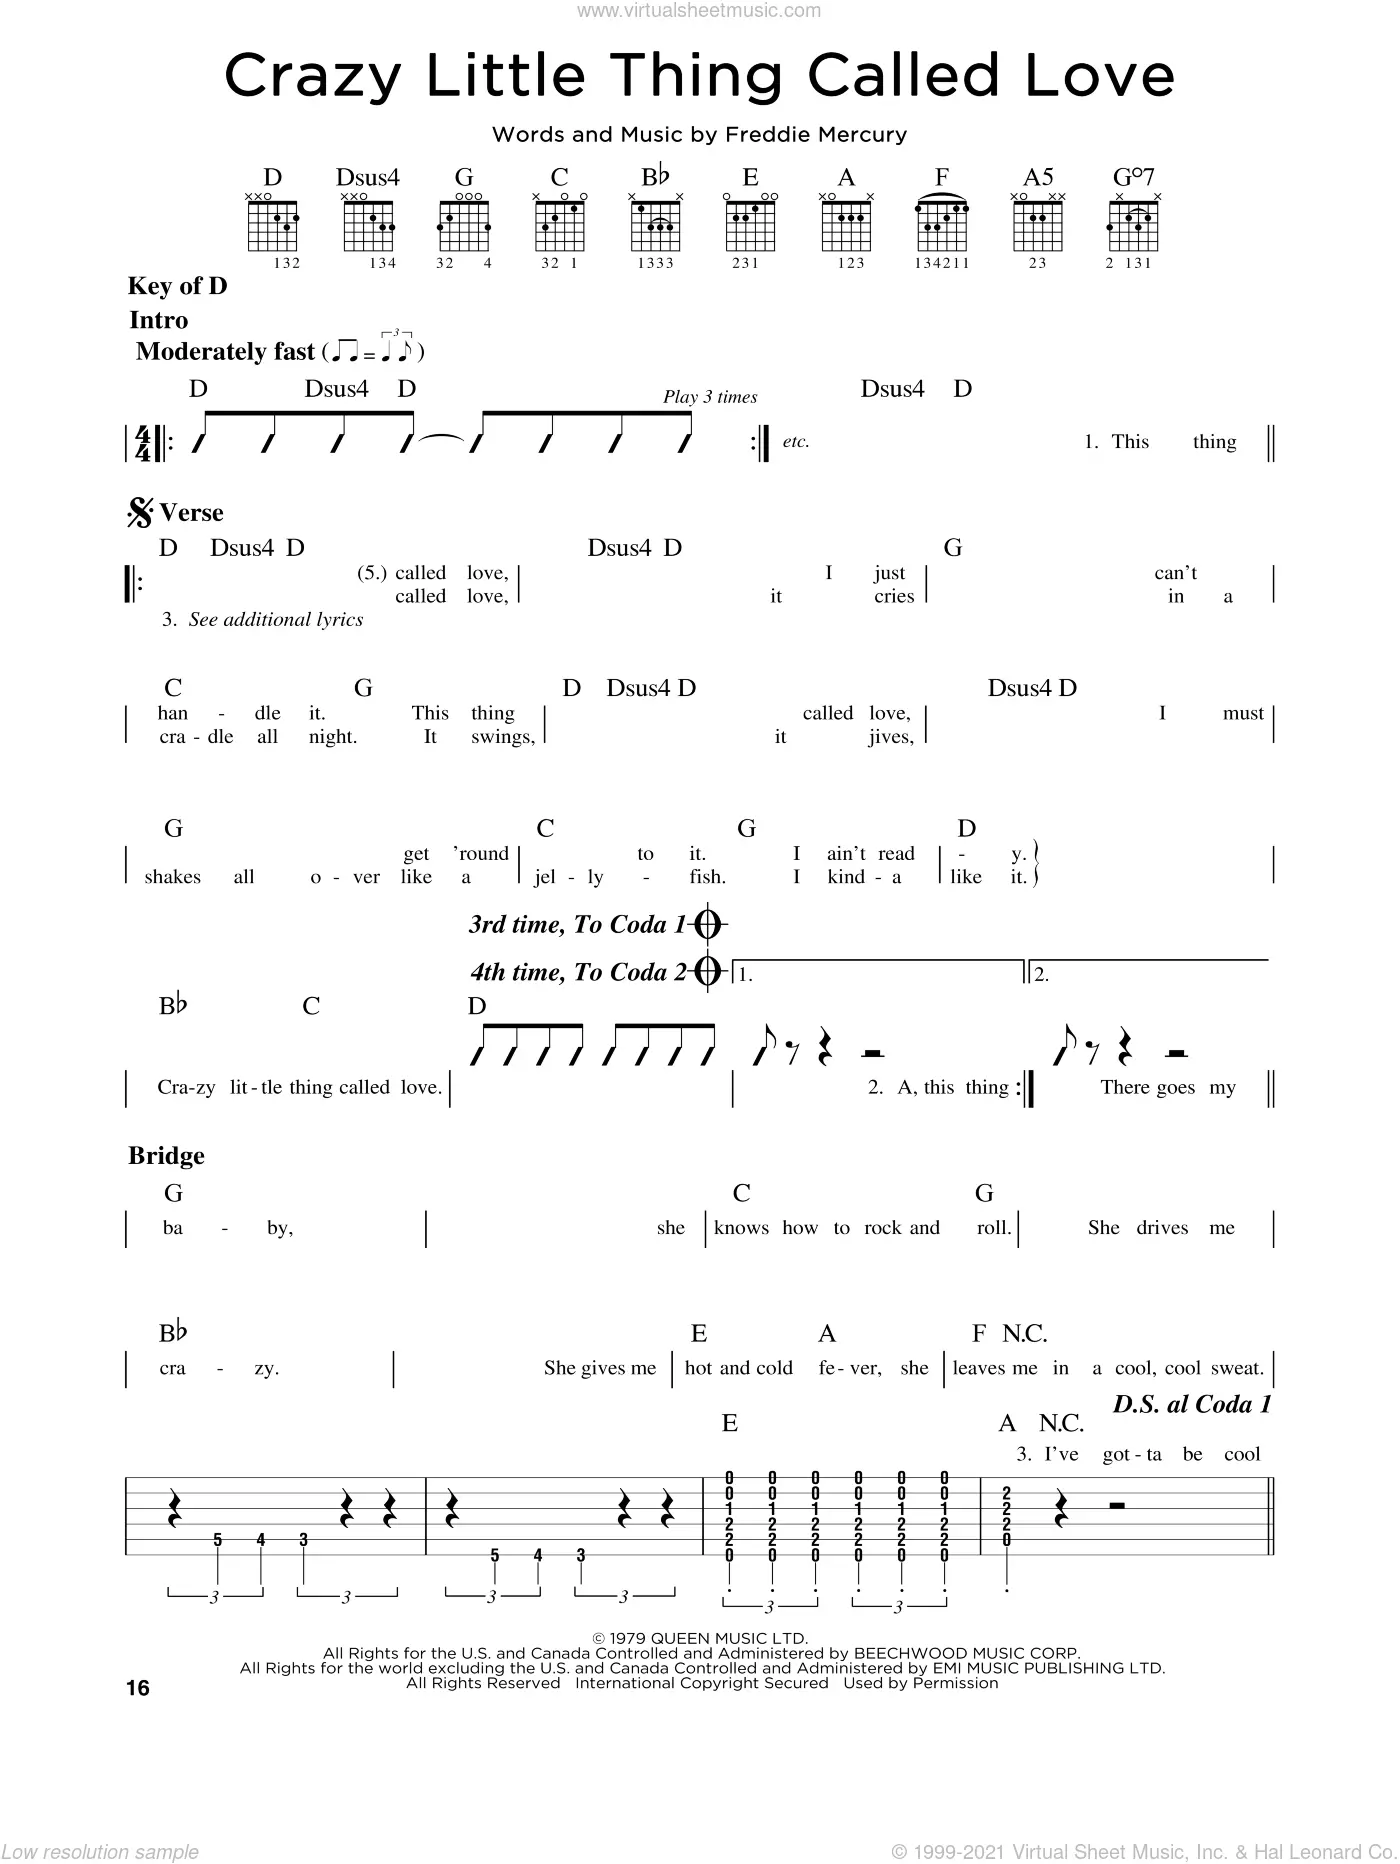 Nægte Odysseus Hængsel Download Digital Sheet Music of Queen for Melody line, (Lyrics) and Chords